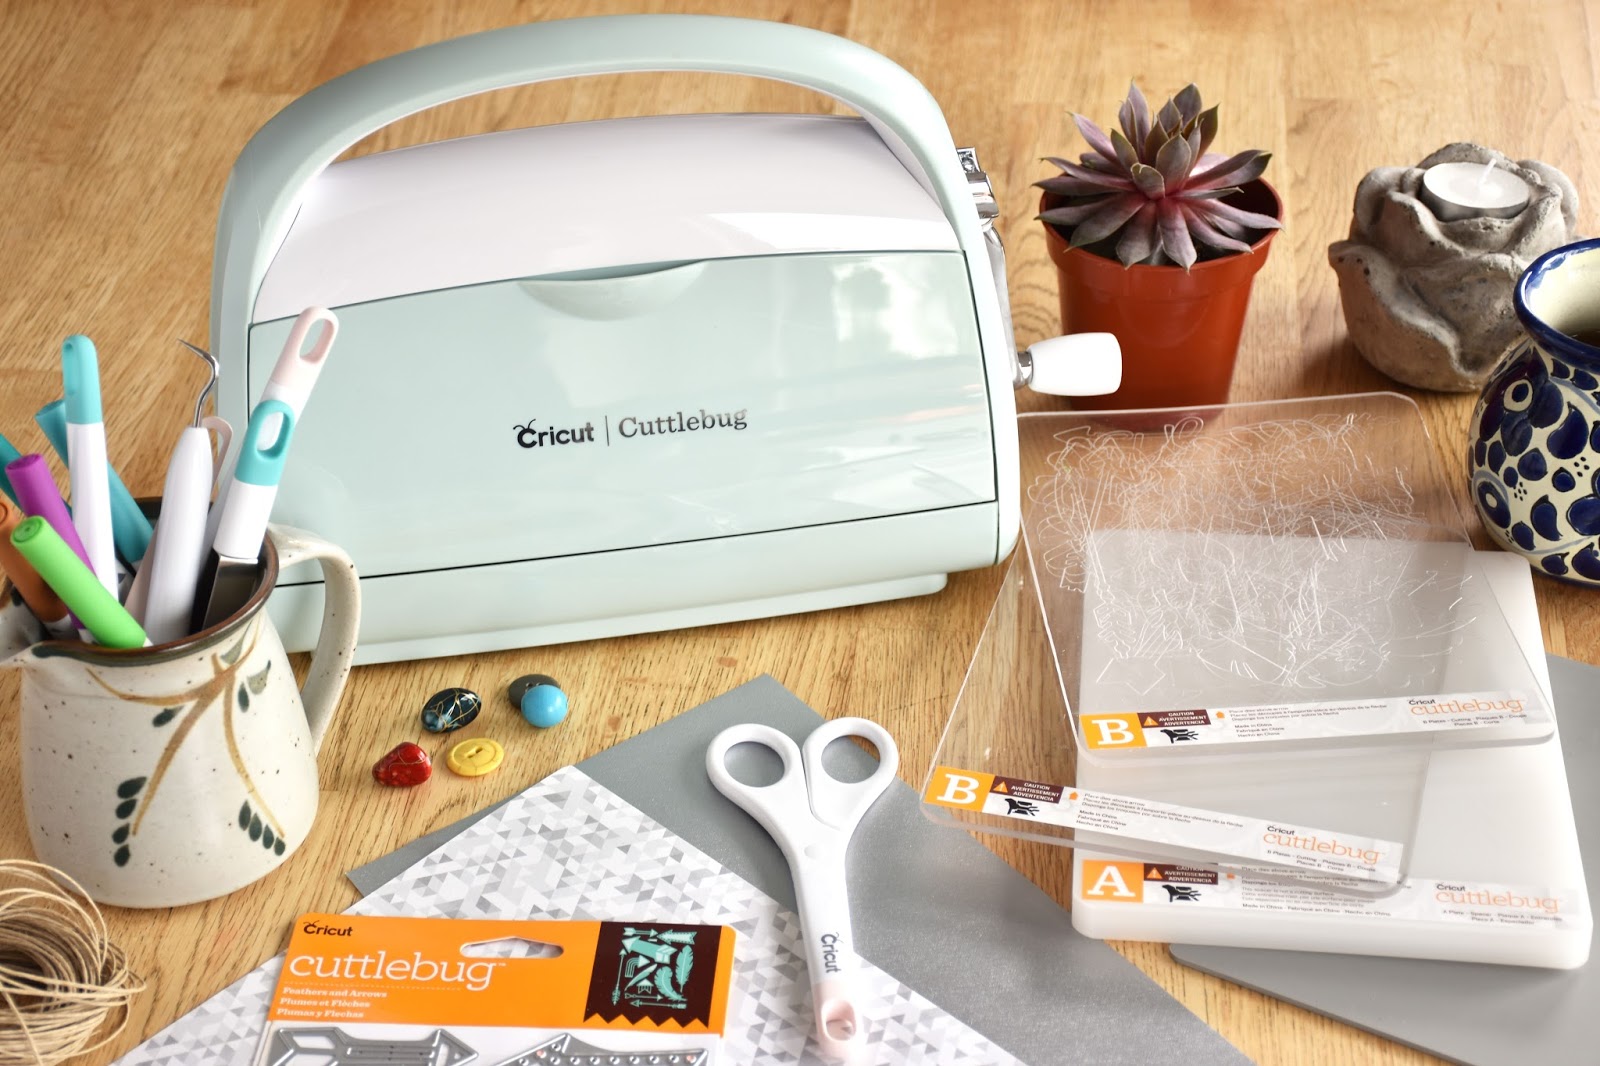 Cuttlebug vs Cricut Explore or Maker: Why It's Great to Have Both